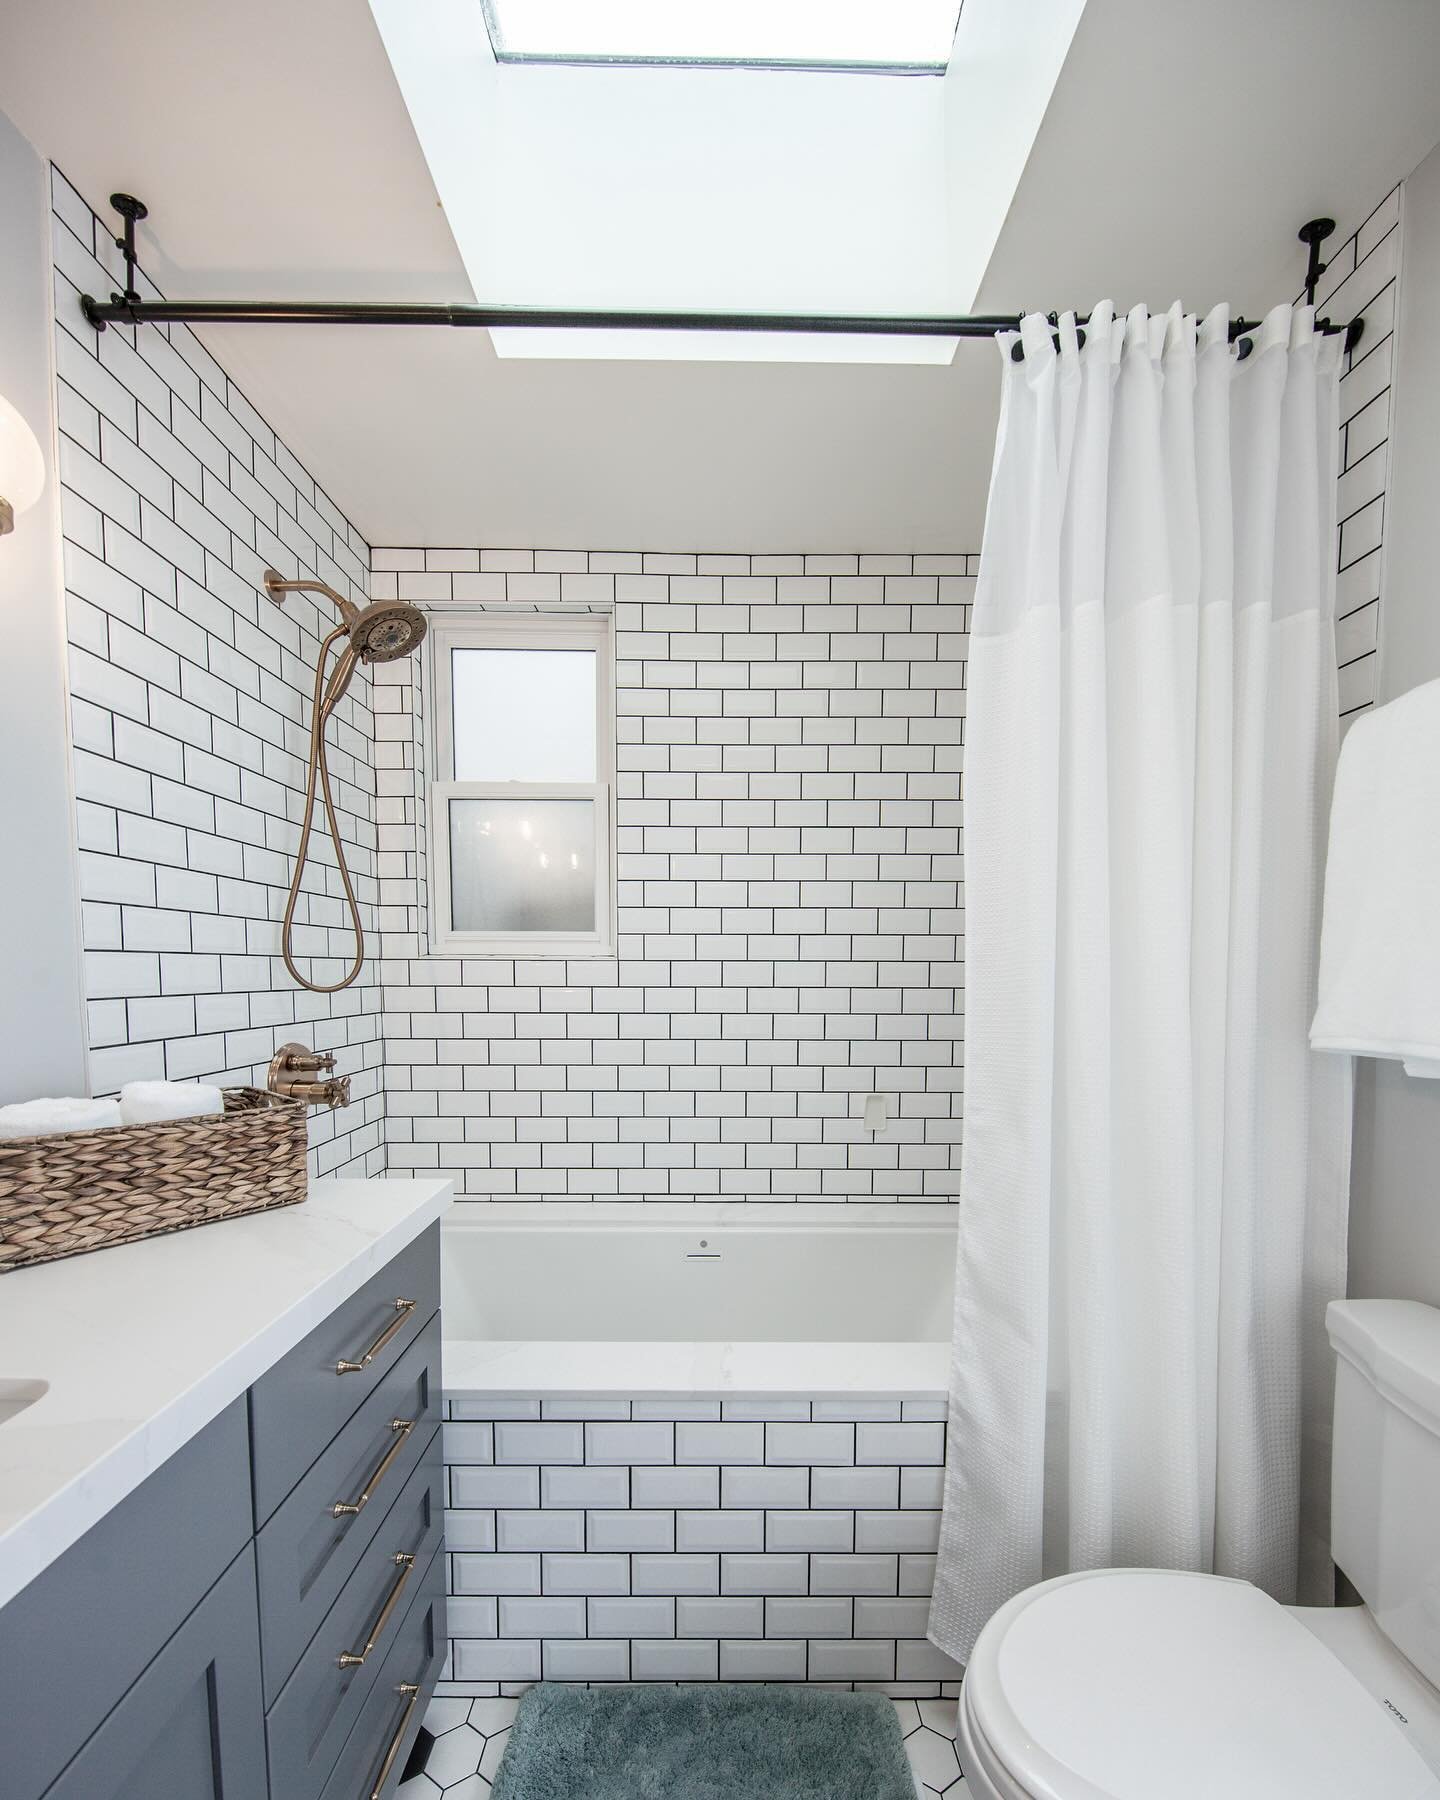 A tip for making shower curtains look their best: hanging as close as possible to the ceiling! It helps make the shower look larger, and gives it a designer touch by being different from the &lsquo;standard&rsquo; approach. 
Bathroom by Rachael